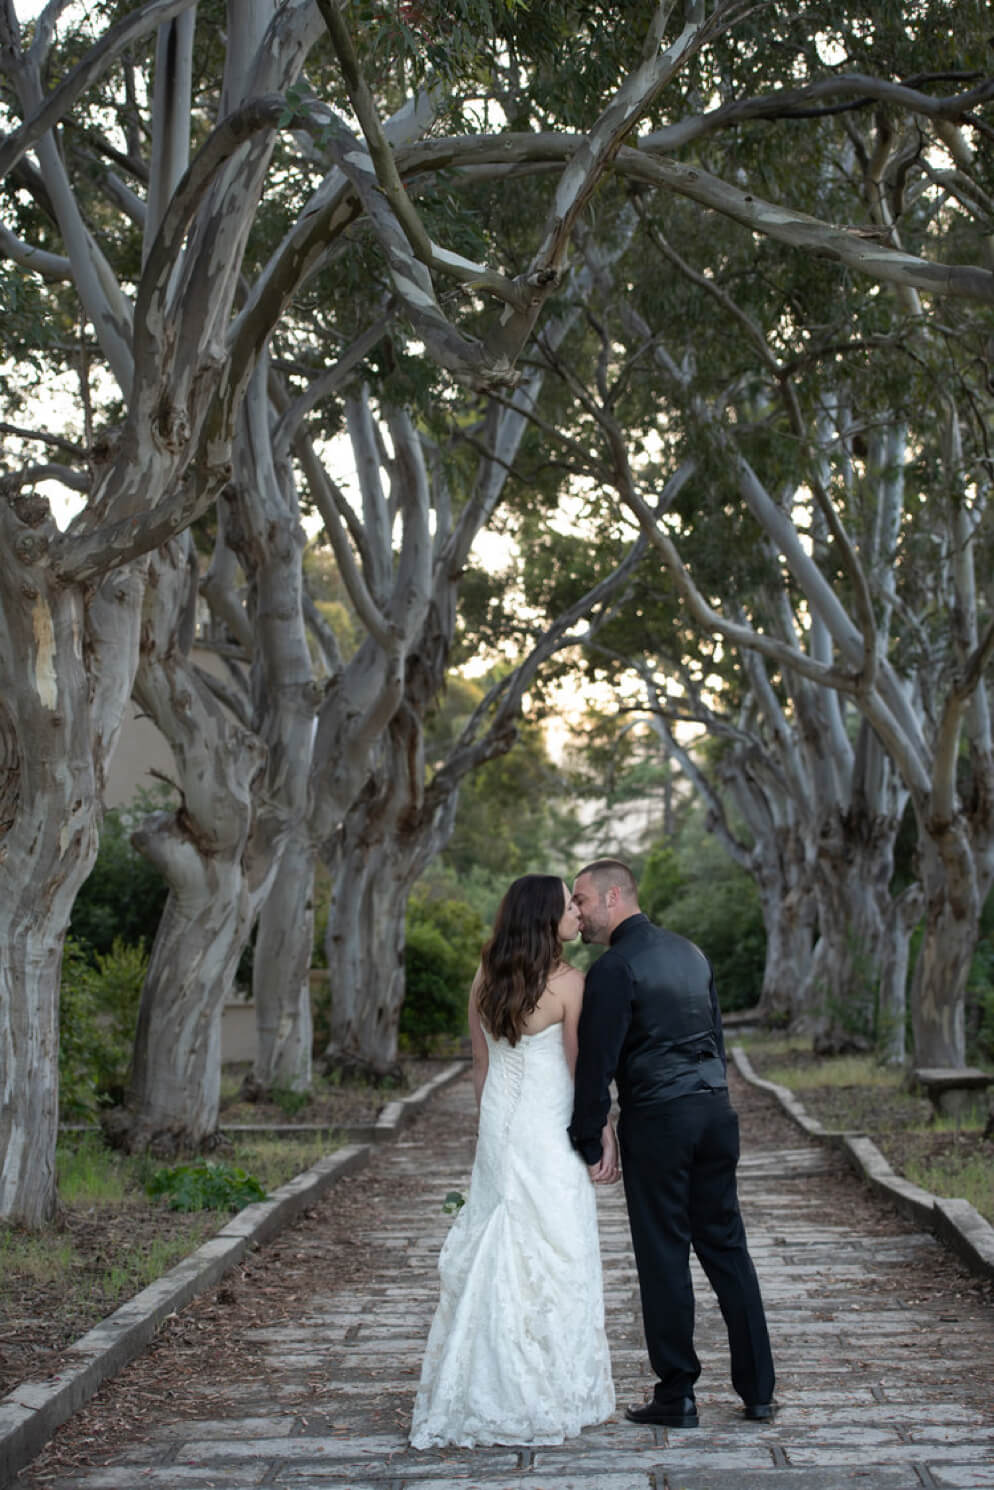 Couple kisses under trees on their wedding day